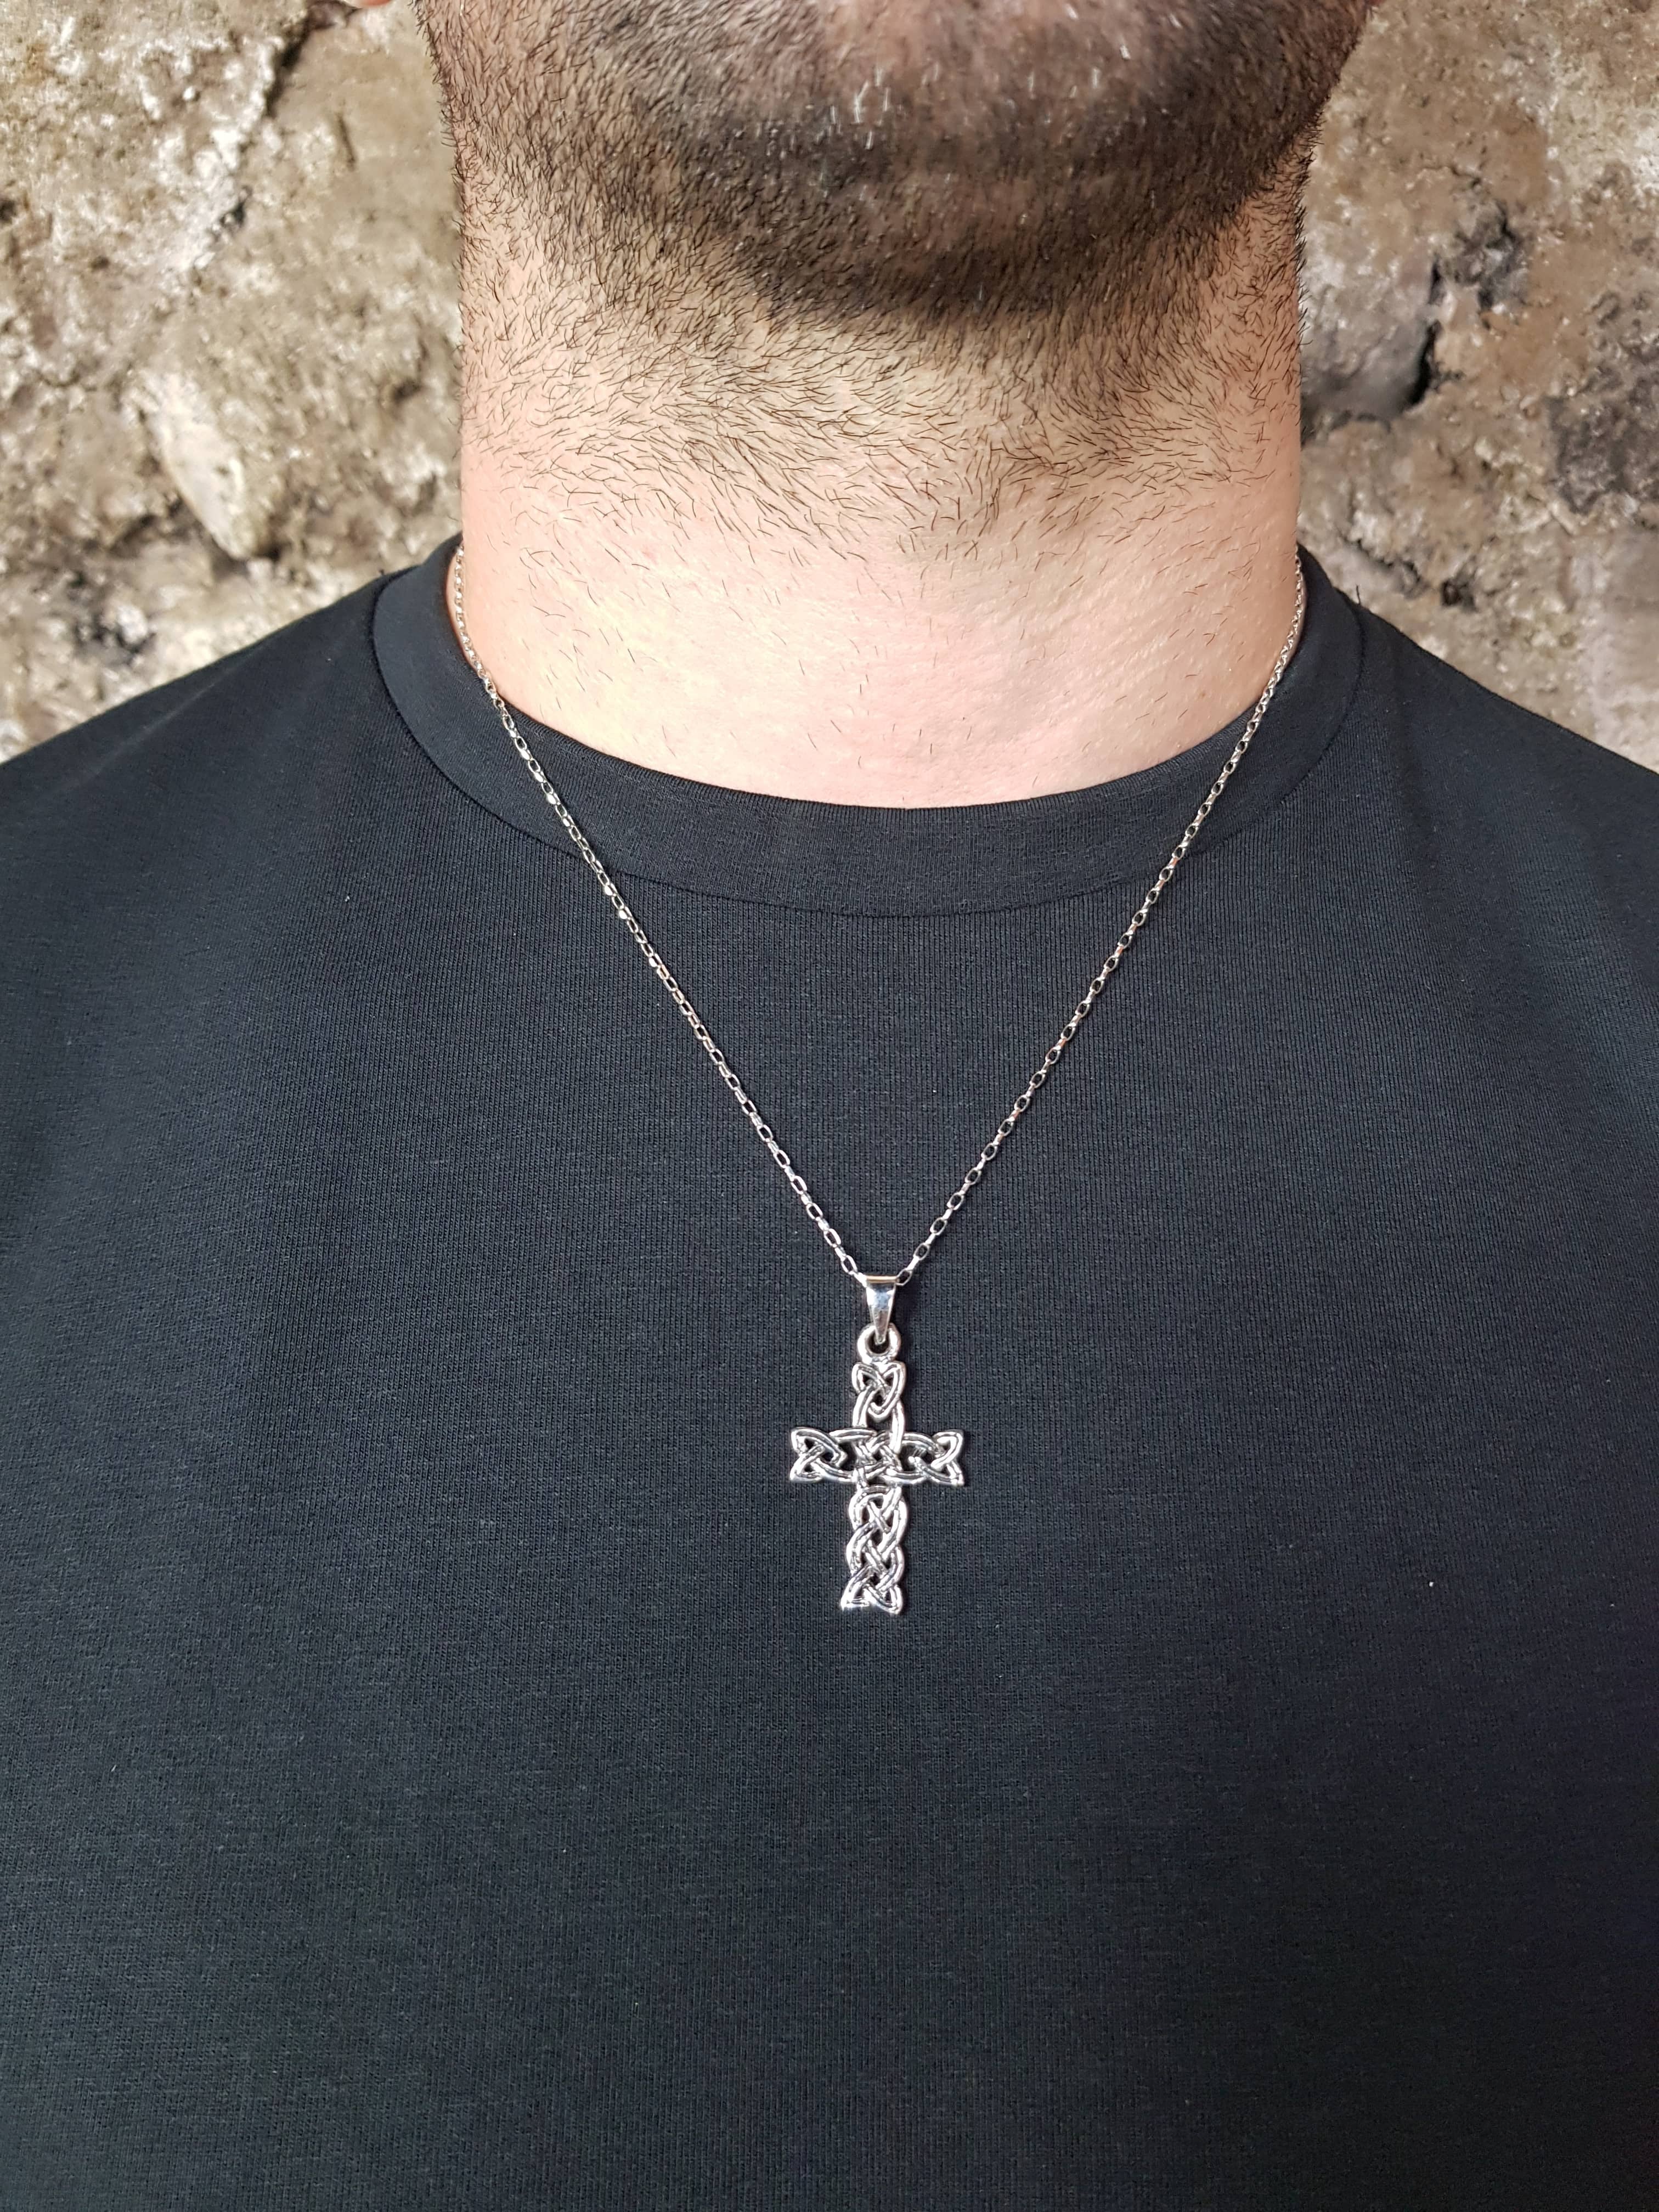 Intertwined Cross Necklace